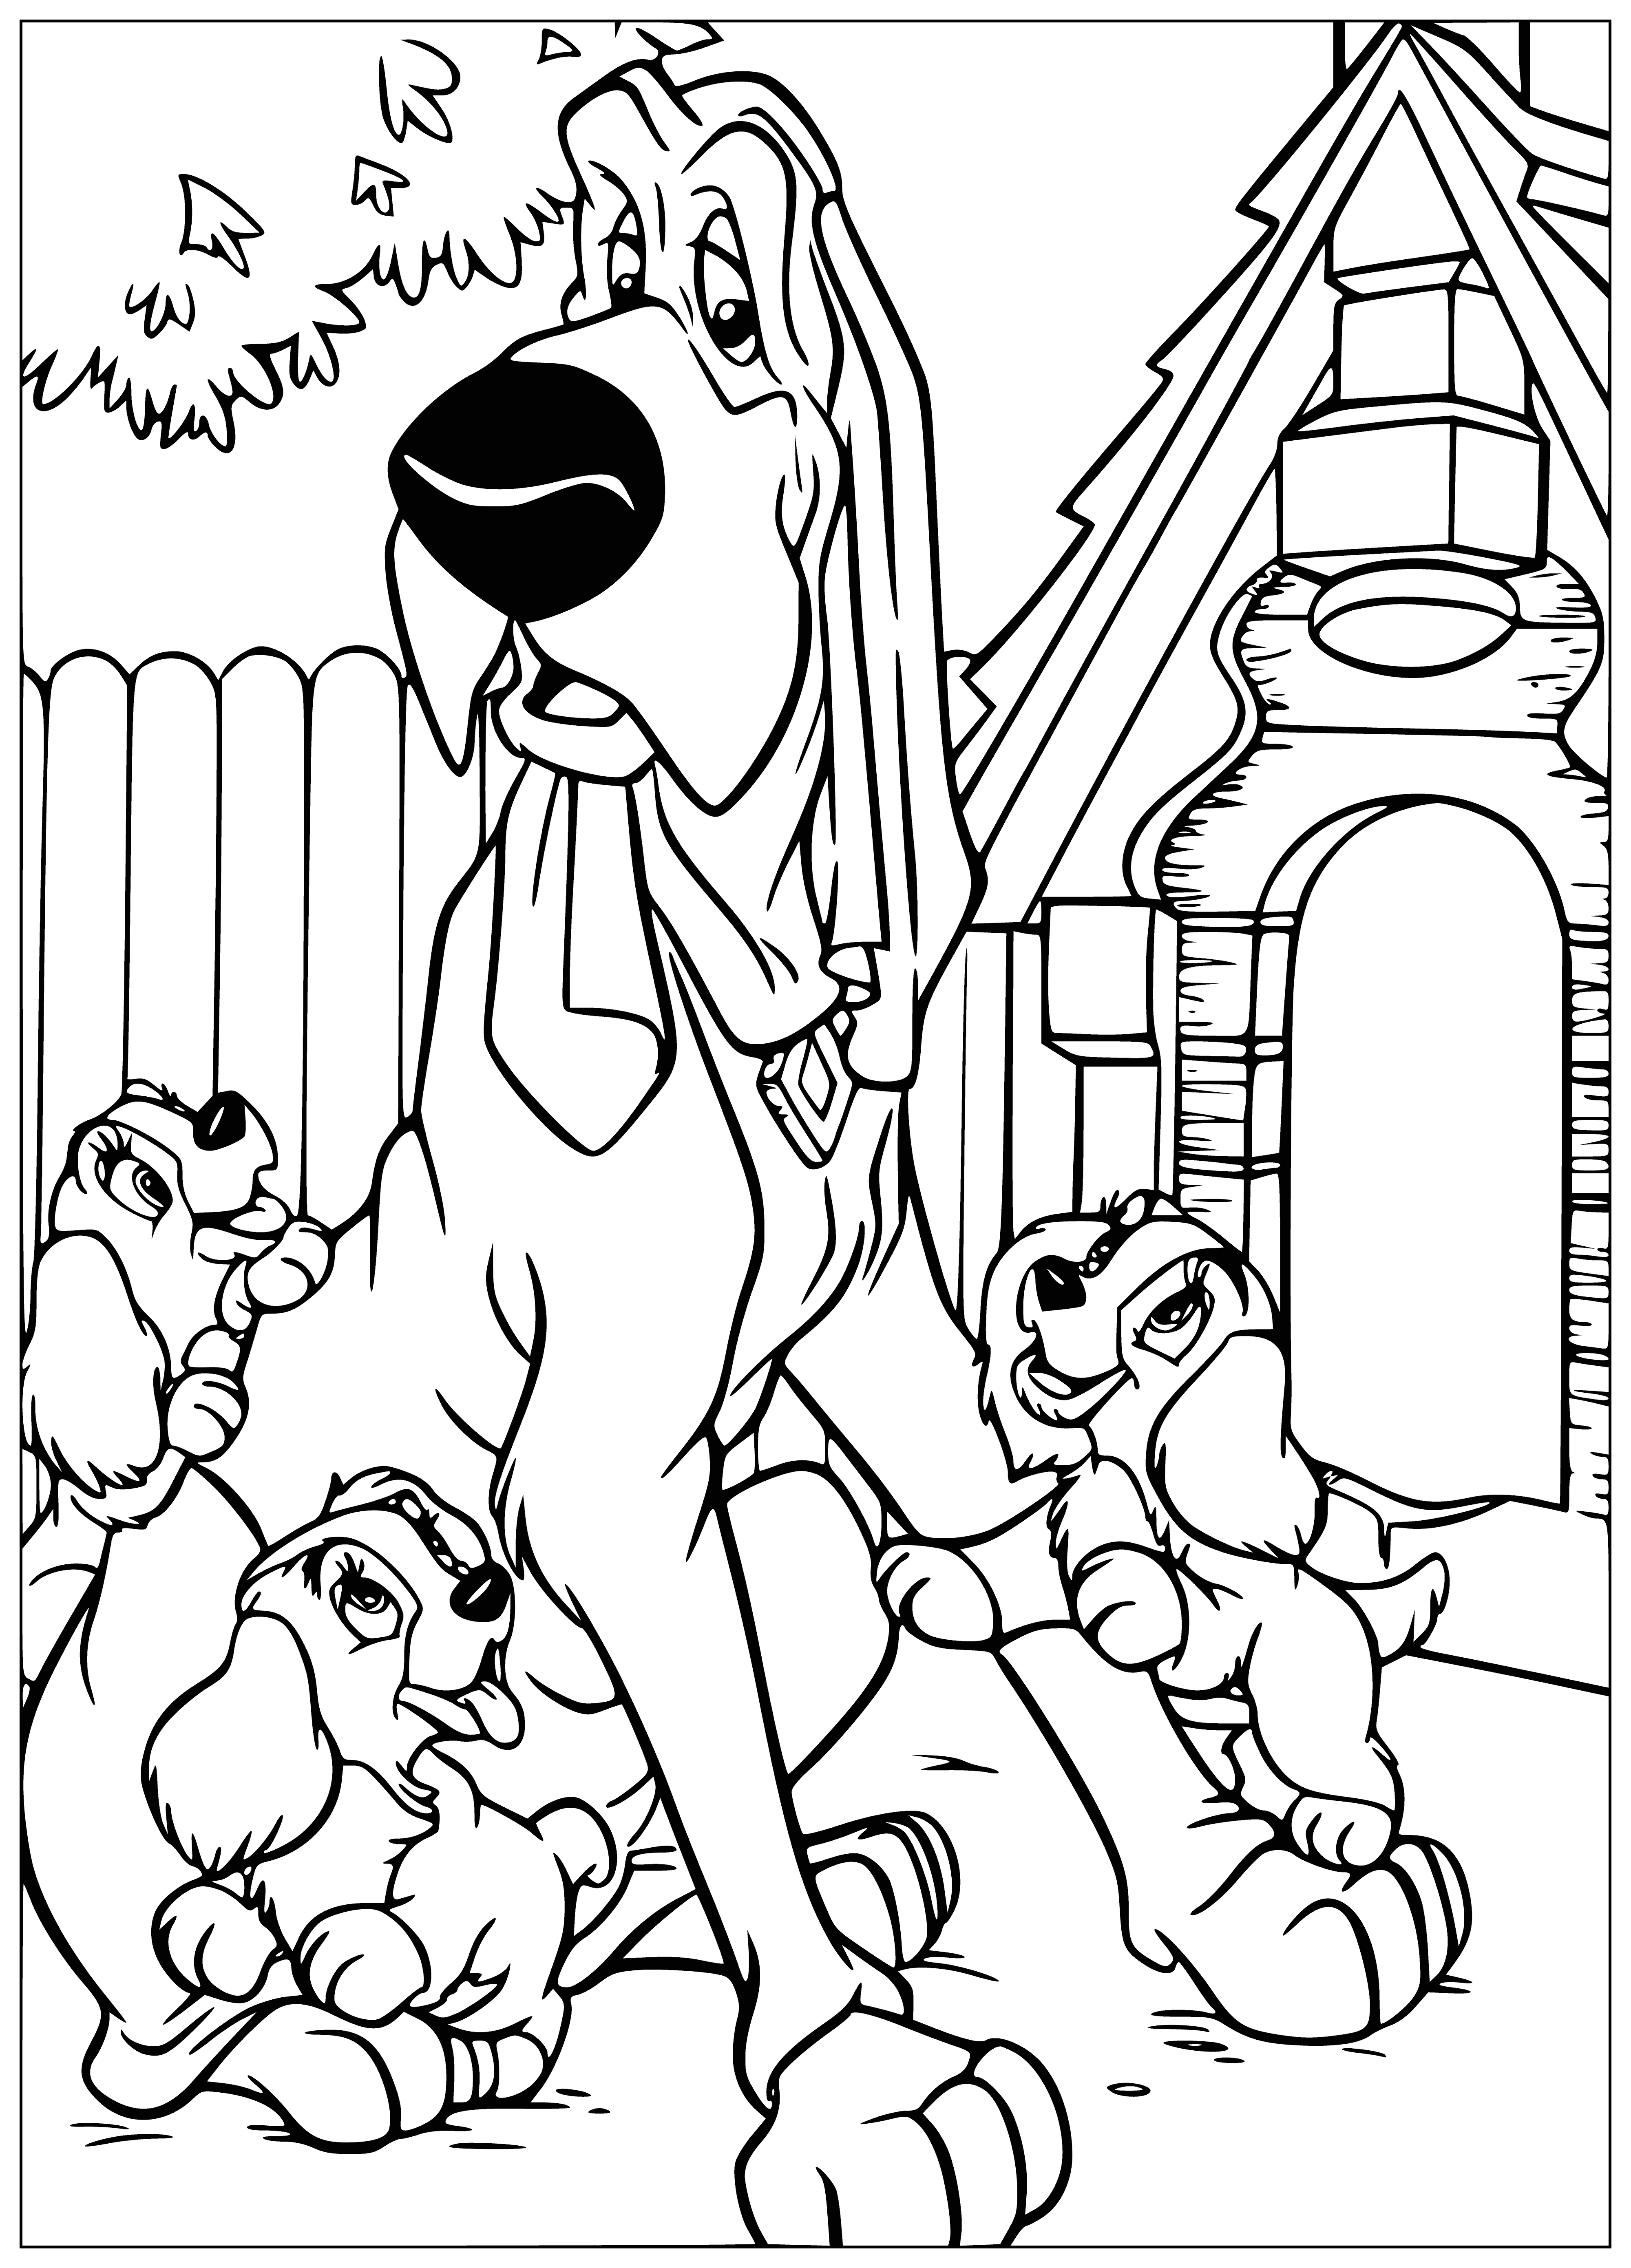 coloring page: Dog sitting on ground with four small puppies next to her. #doglovers